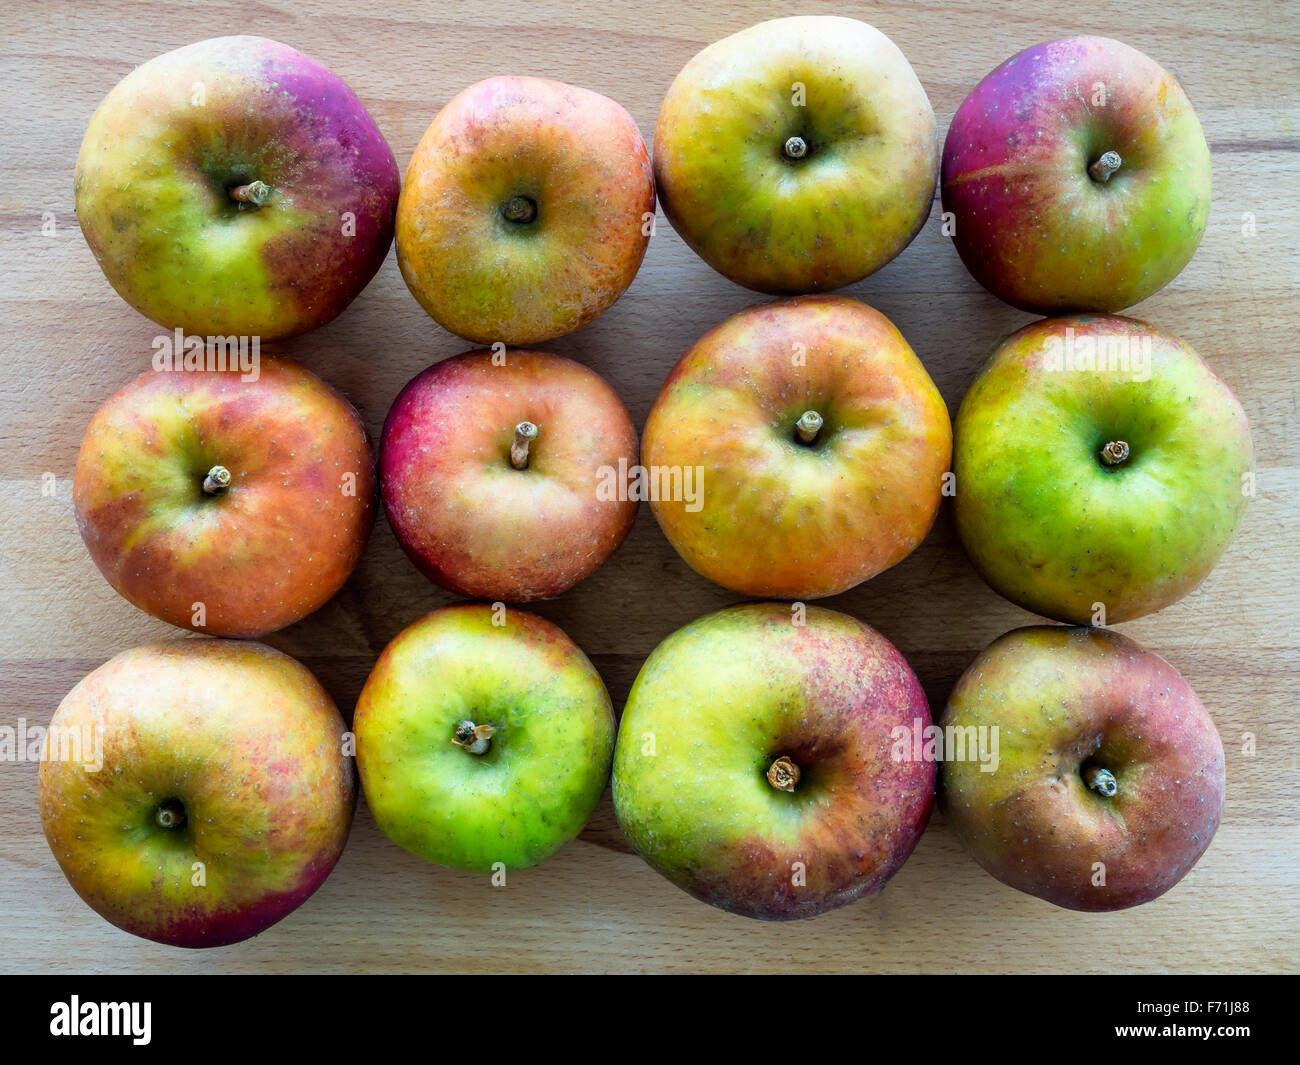 12 fresh apples in 3 rows Stock Photo